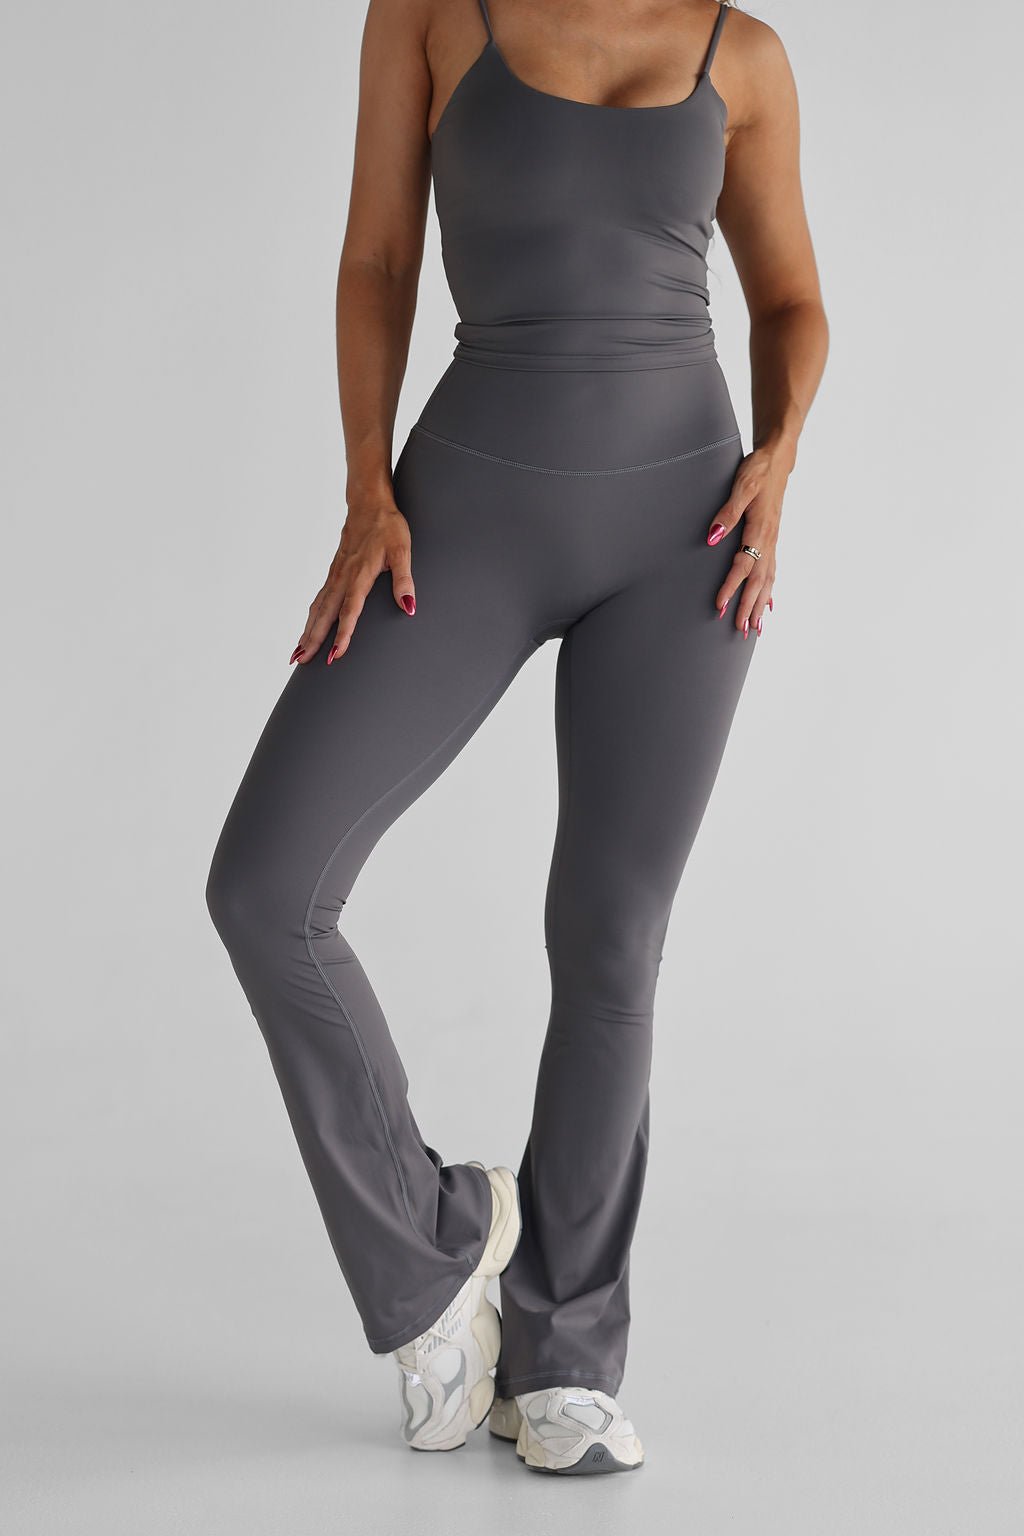 SCULPT Flare Leggings - Charcoal (SHIPPING FROM 9/6) - LEELO ACTIVE